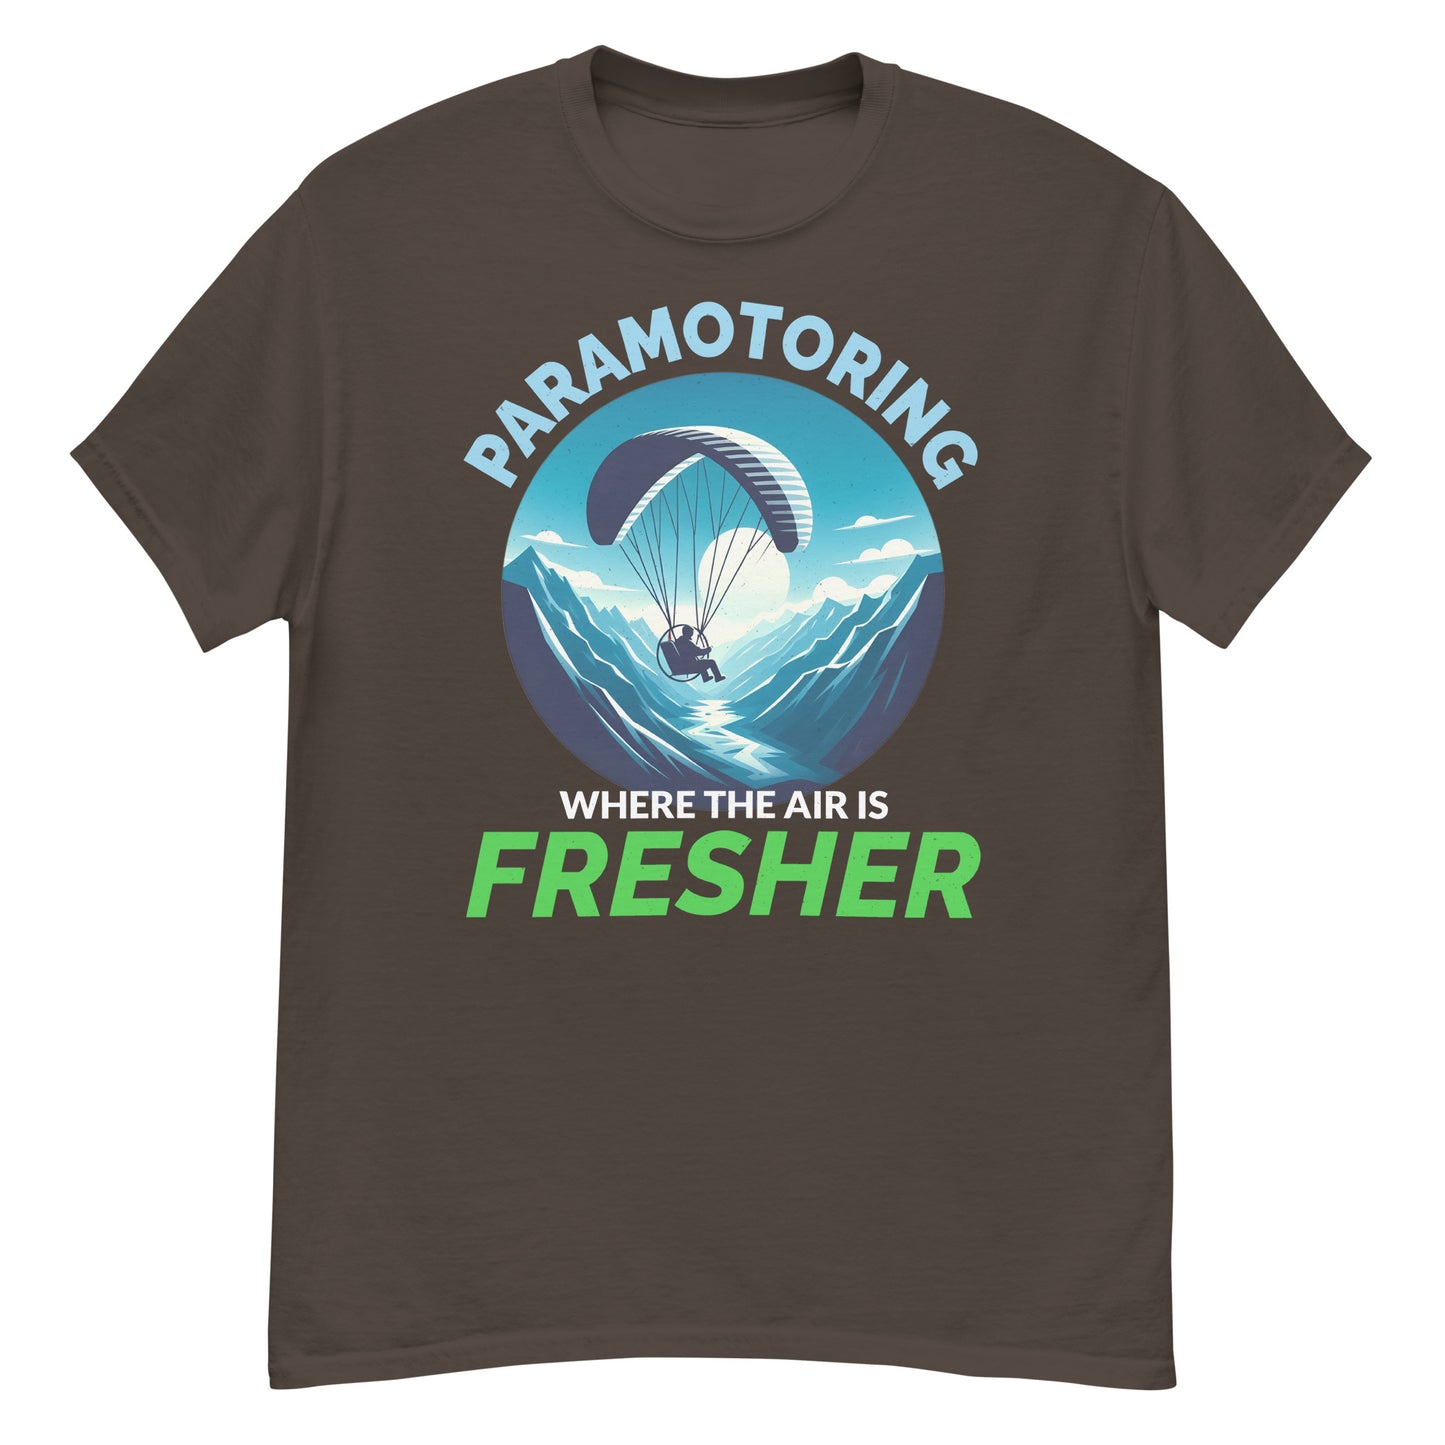 Paramotoring T-Shirt: Where the Air is Fresher